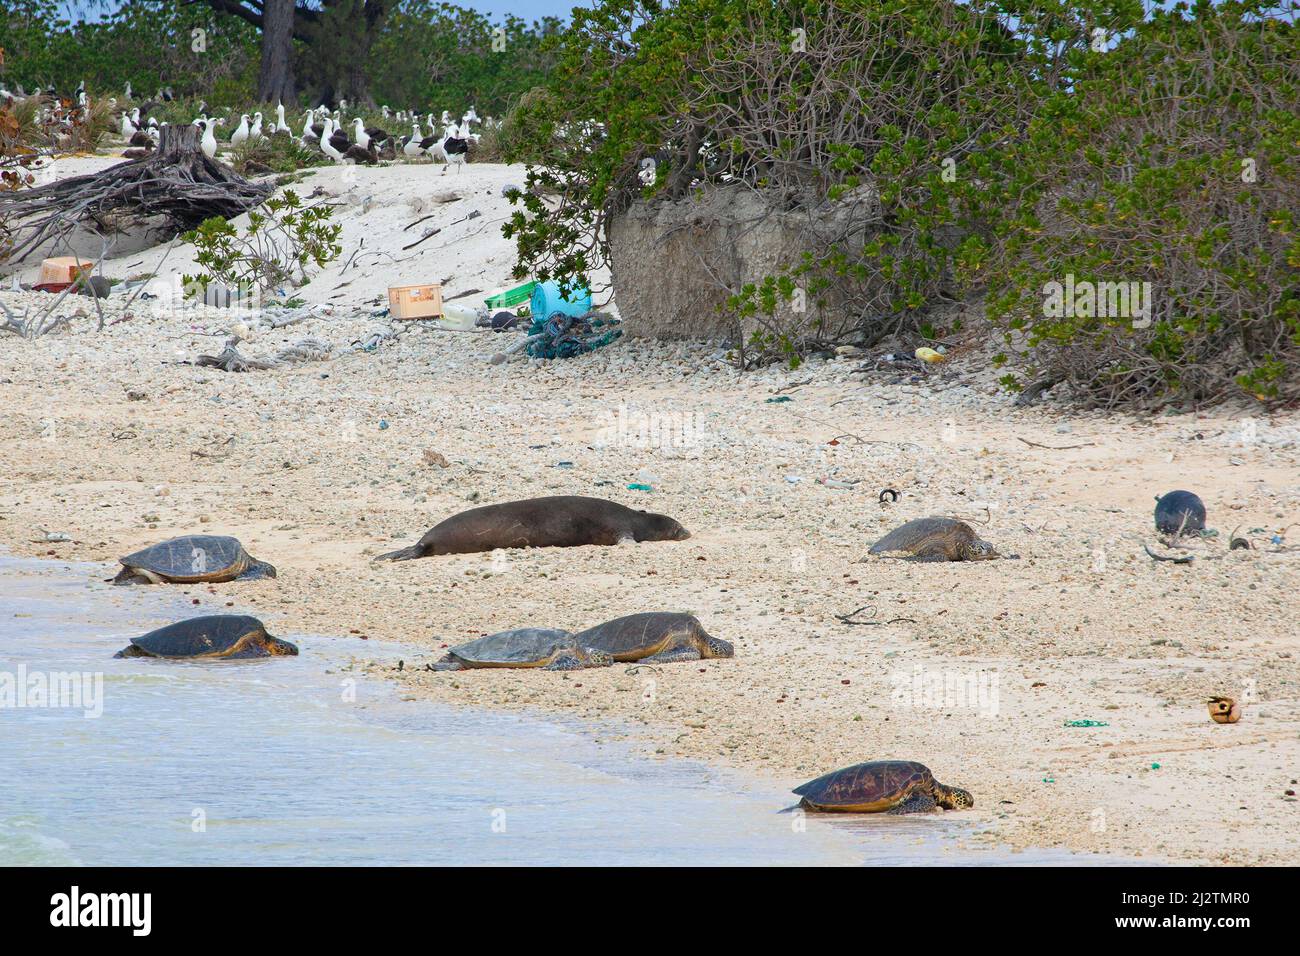 Hawaiian Green Sea Turtles and a Monk Seal basking on a north Pacific Ocean beach with plastic marine debris. Stock Photo